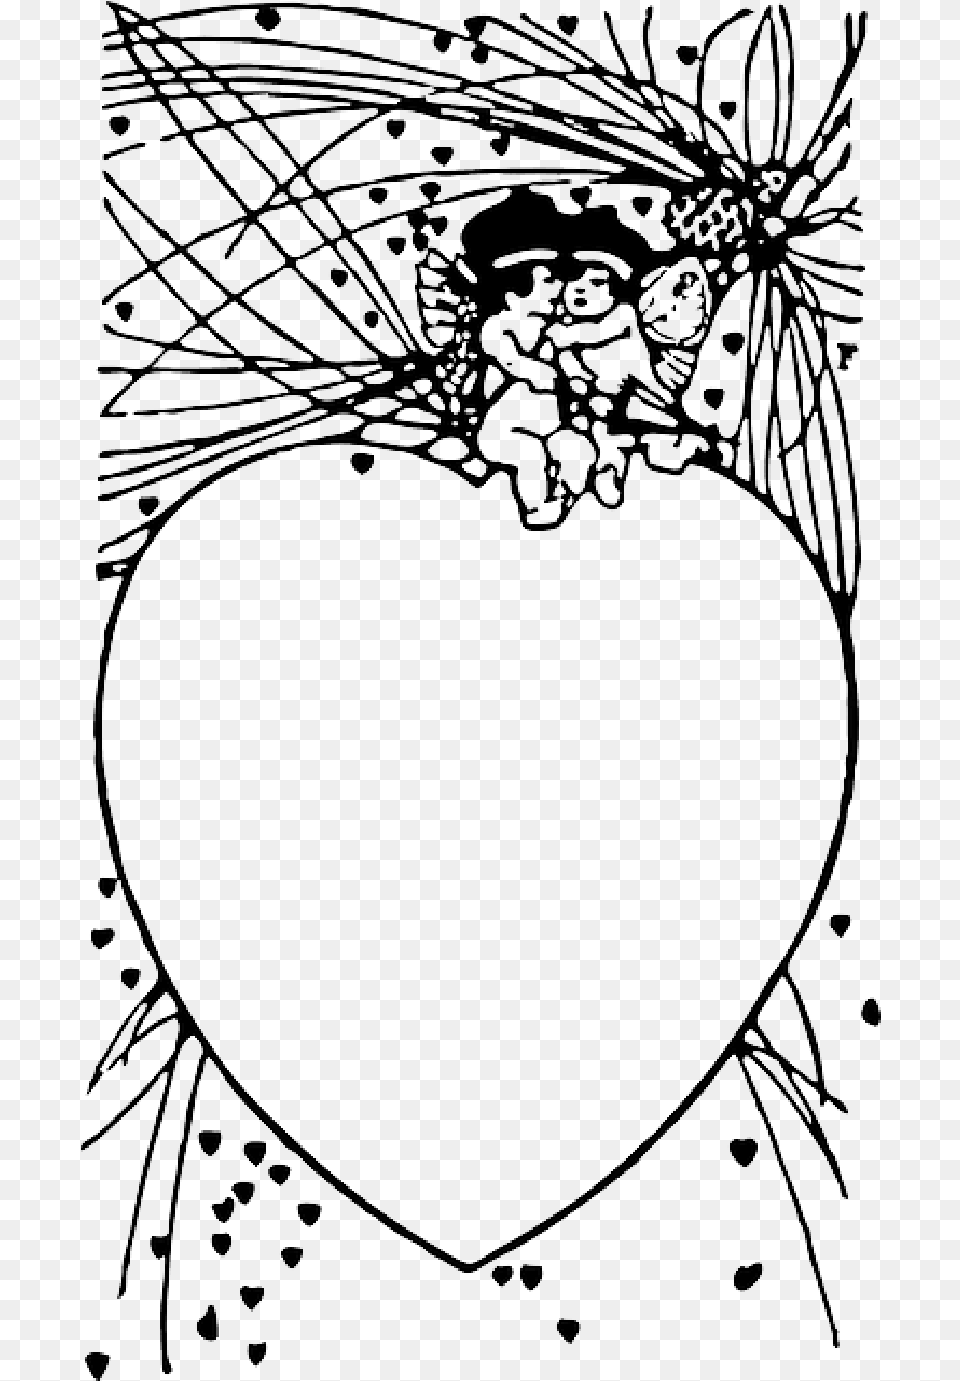 Outline Frame Cartoon Heart Babies Cupid Public Cupid Frame Clipart, Accessories, Jewelry Free Transparent Png